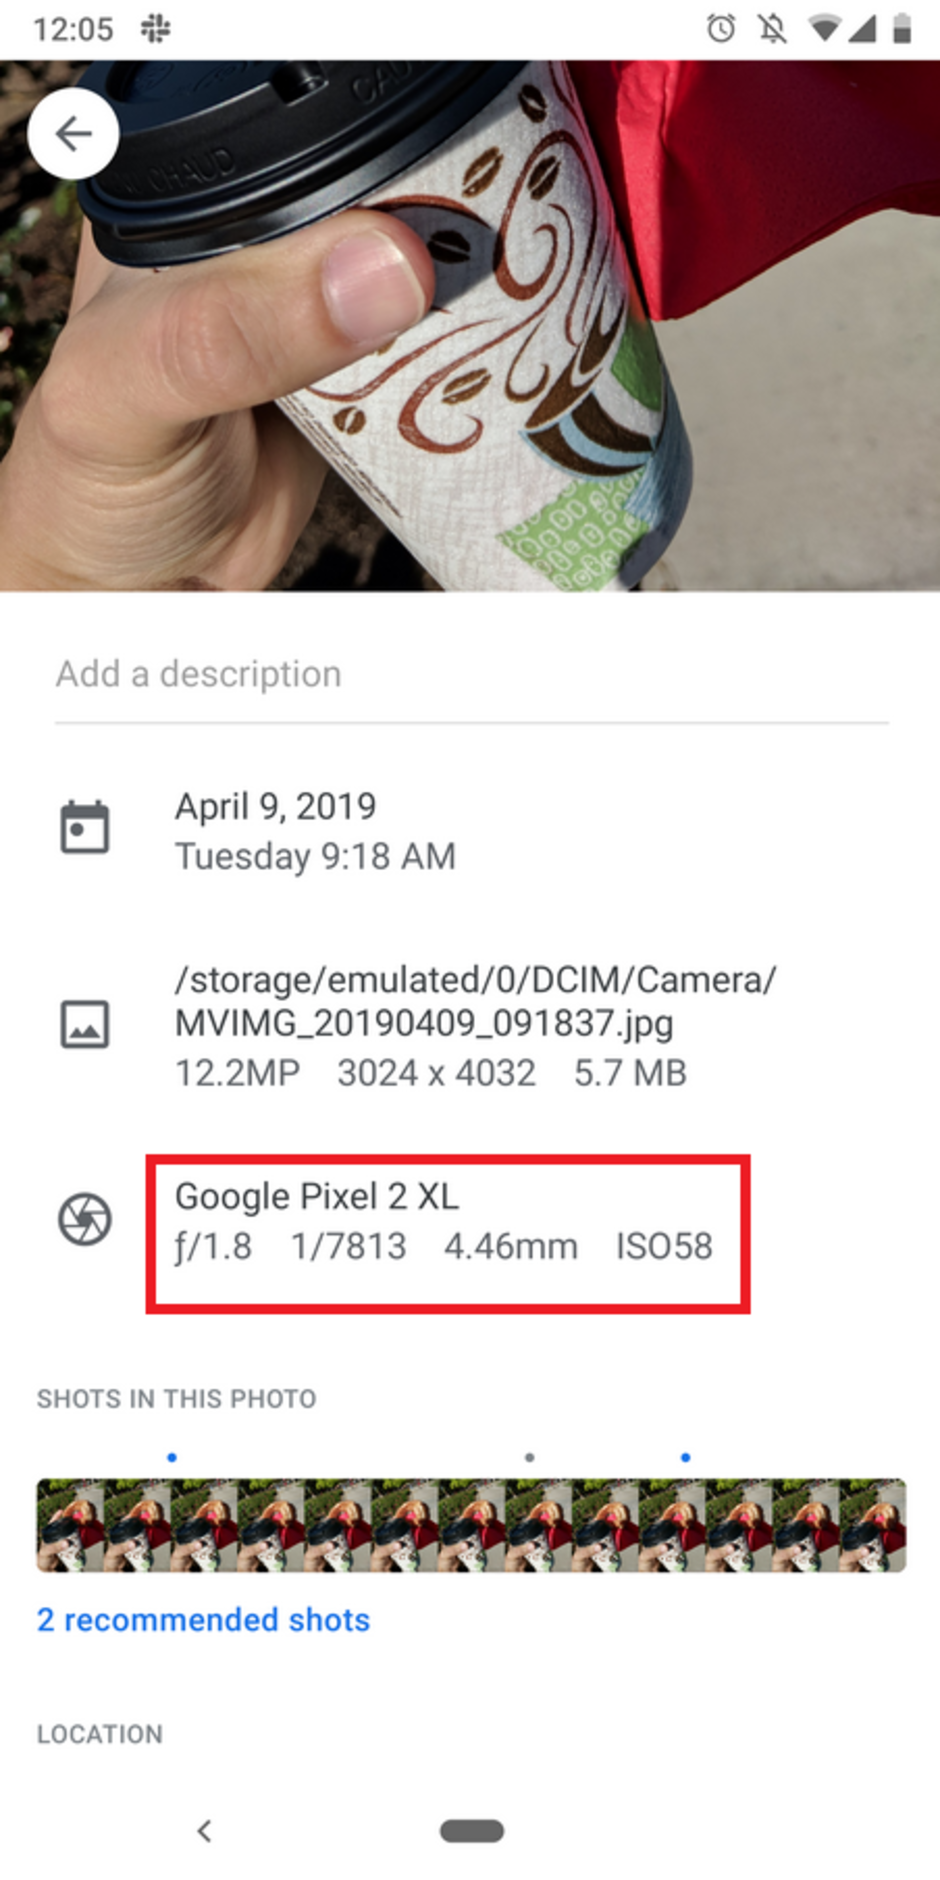 Top Shot appearing on a Pixel 2 XL - Popular AI camera feature on Pixel 3 will definitely not be coming to the Pixel 2